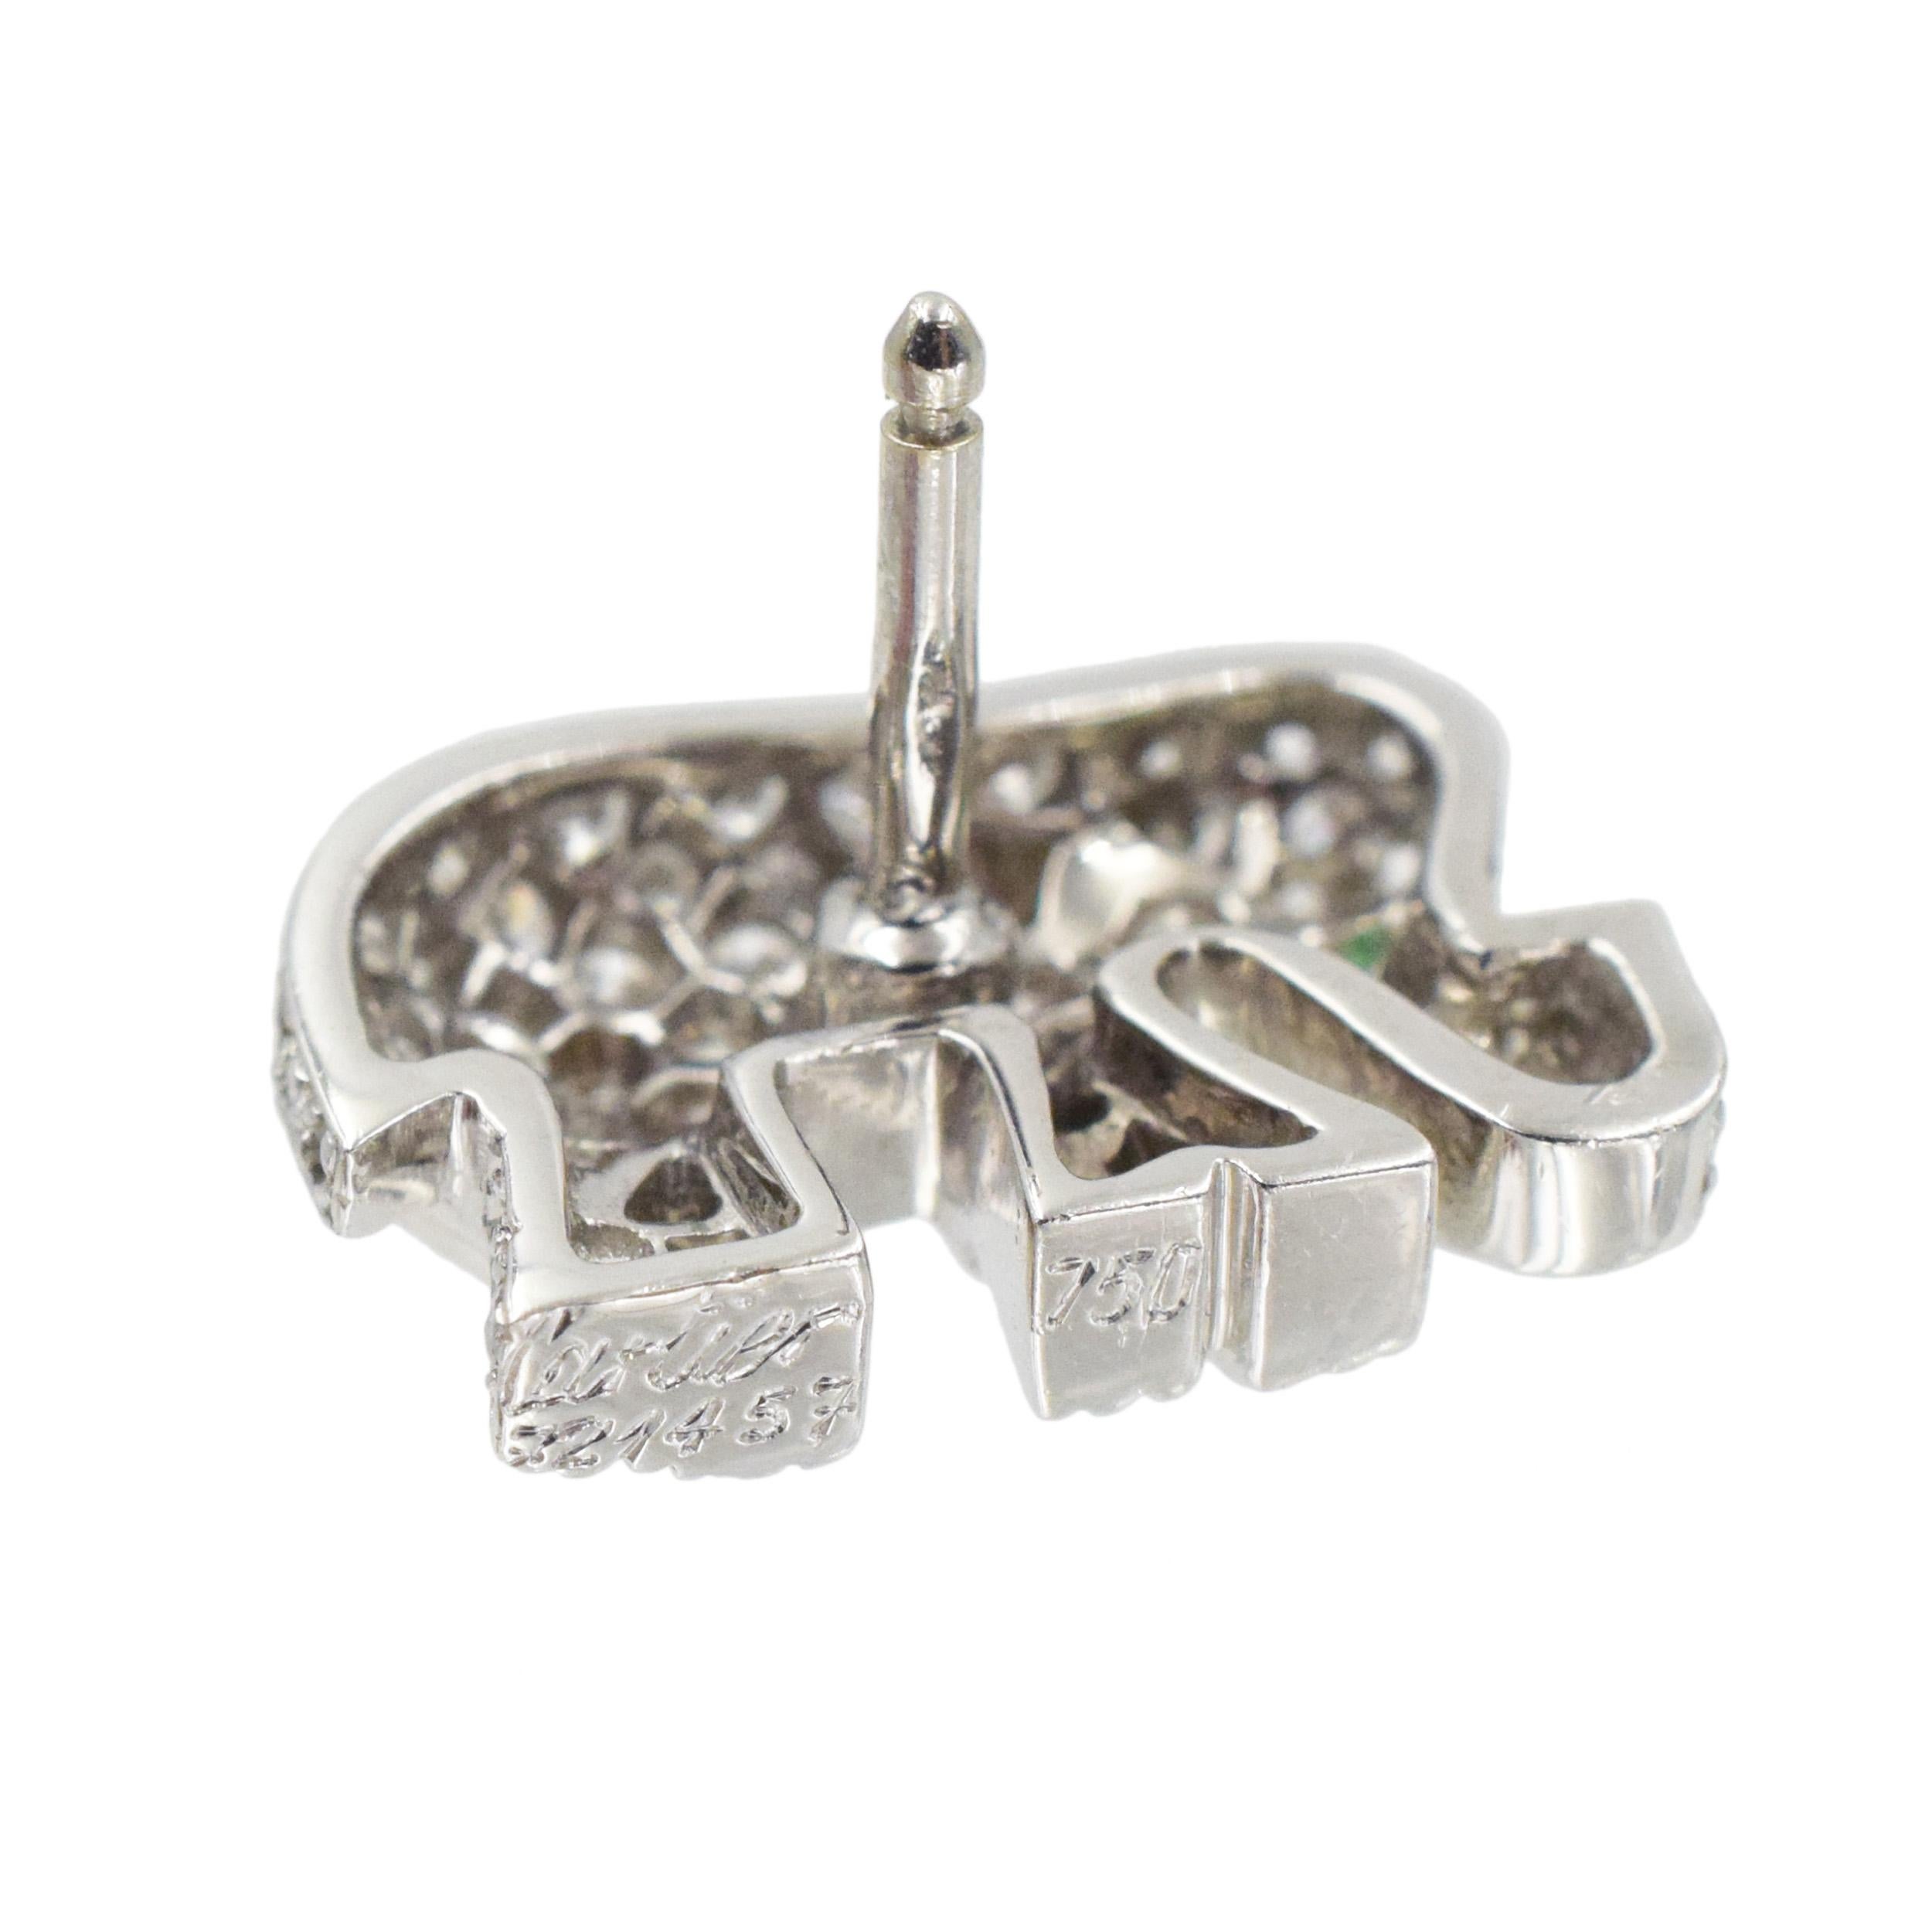 Cartier Diamond and Emerald Elephant Brooch and Earrings Set In Platinum. 1